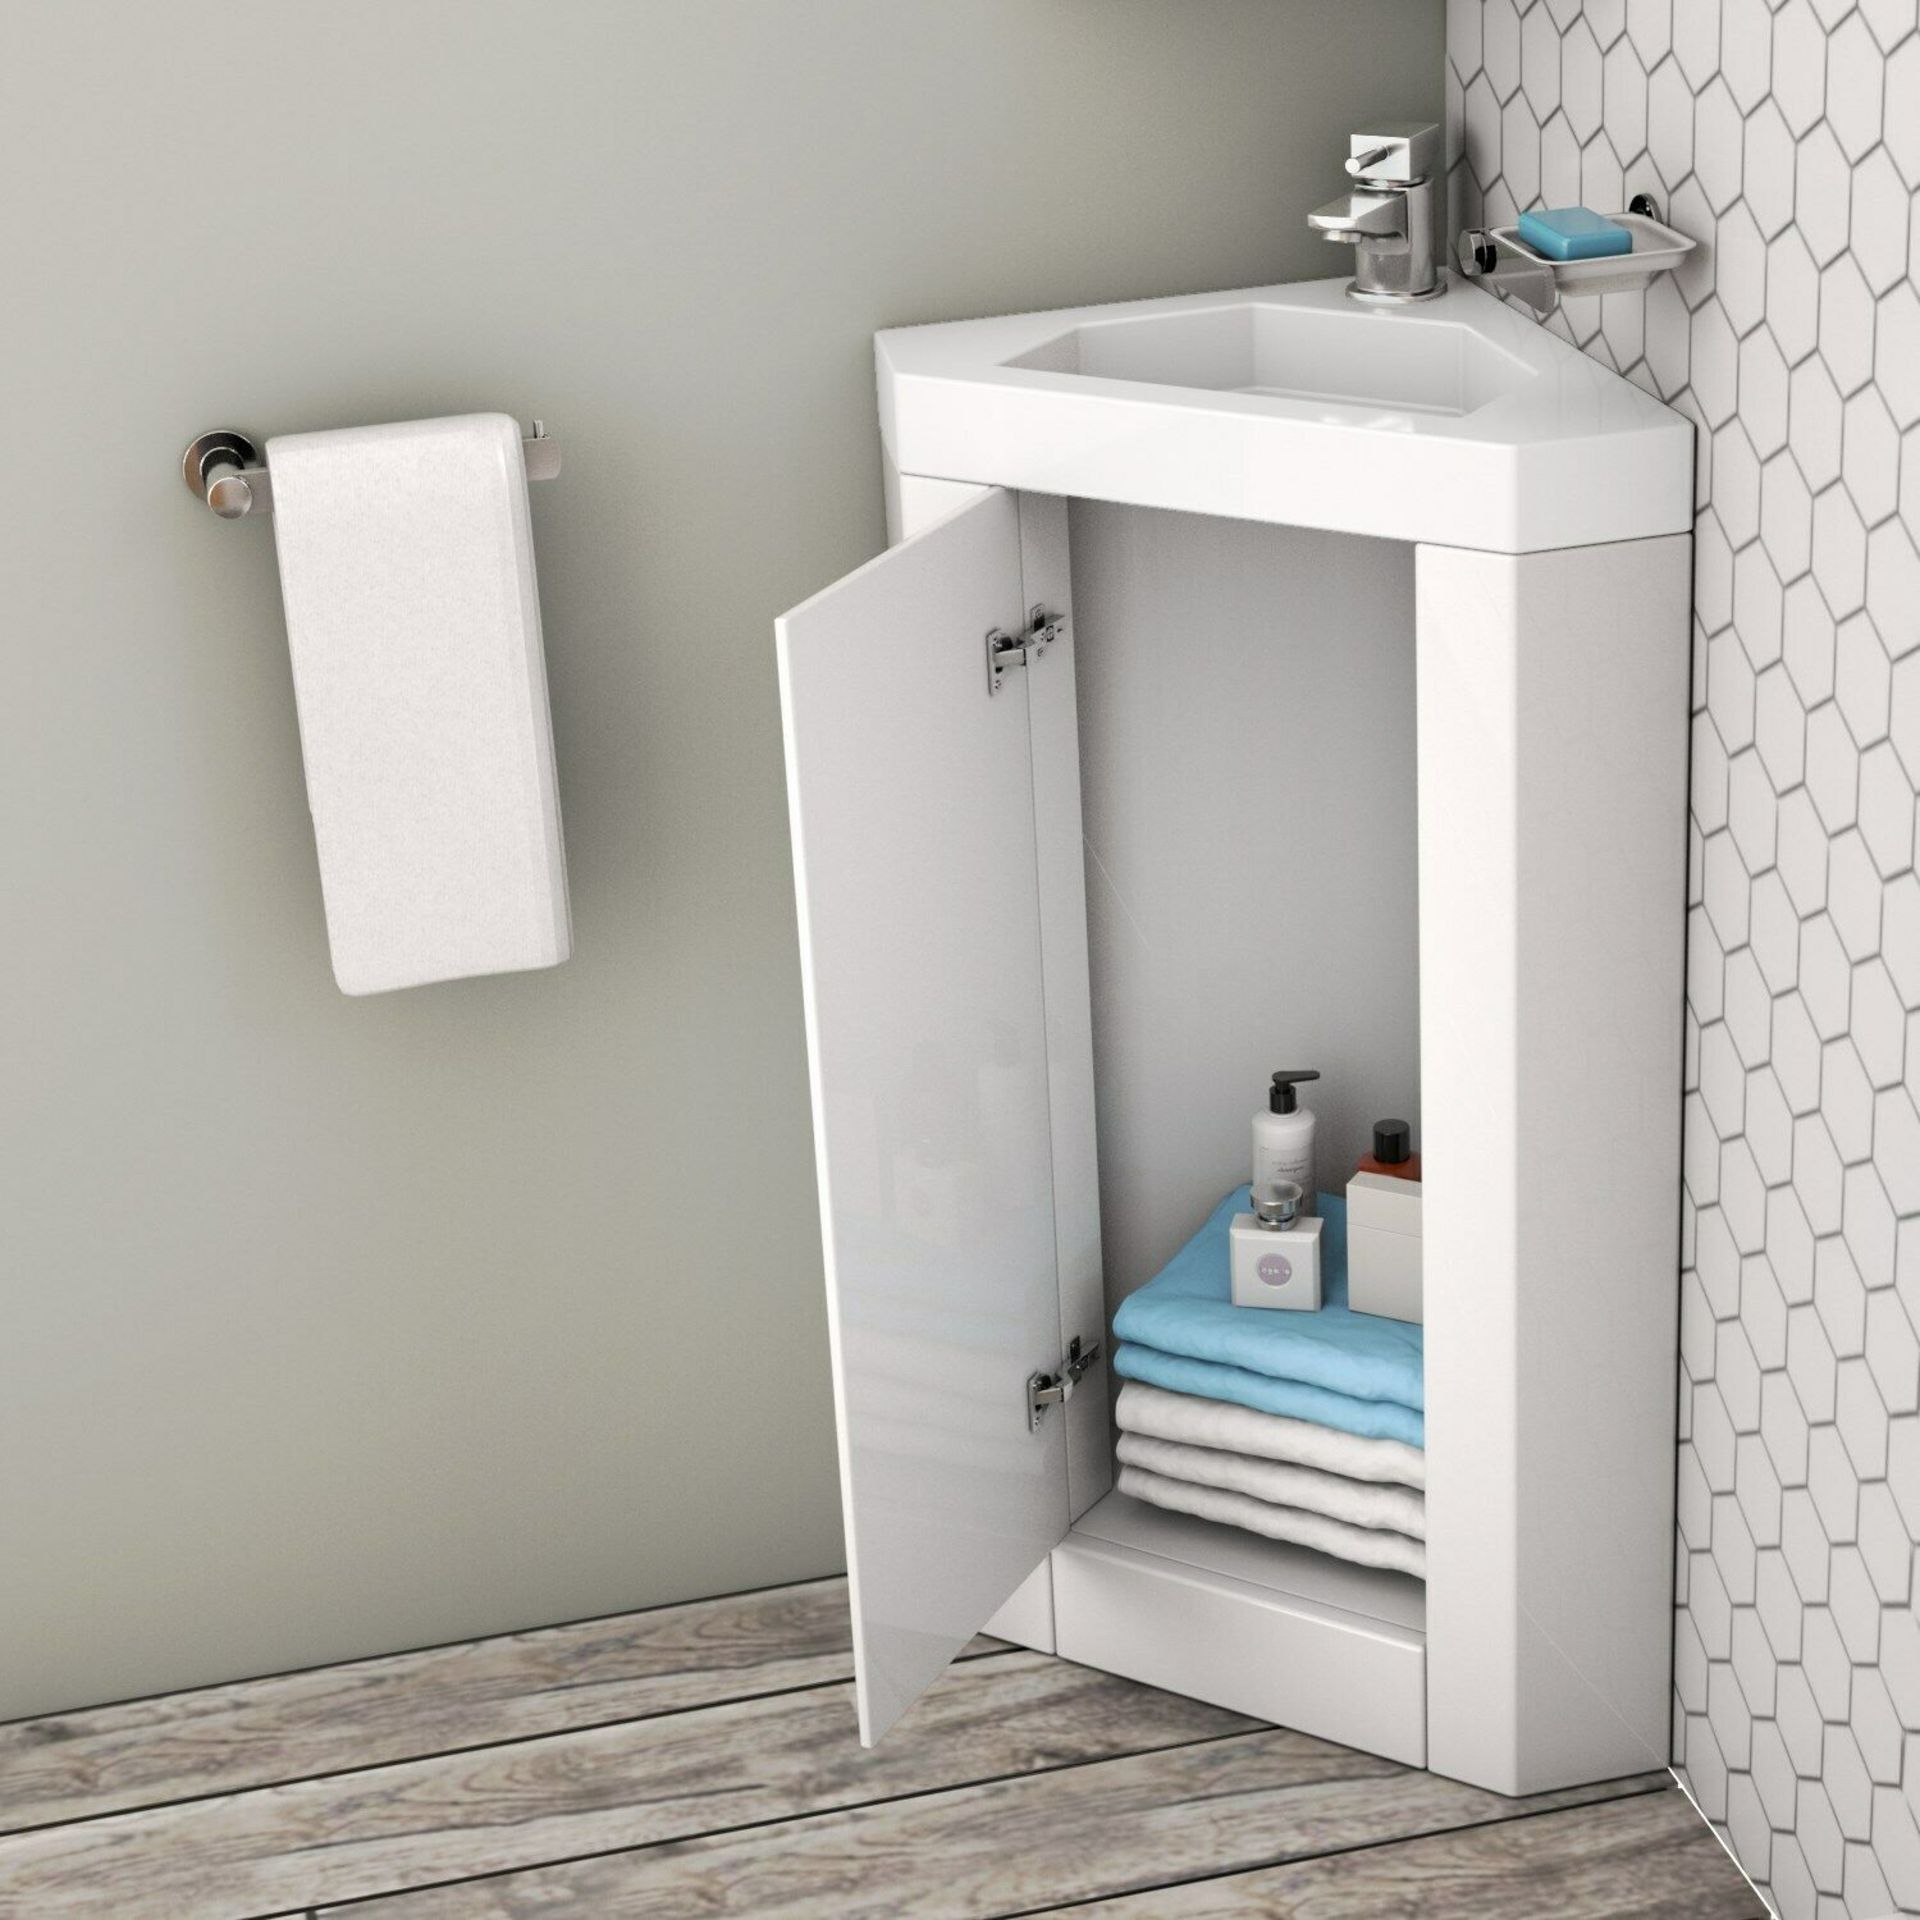 New & Boxed 400mm White Freestanding Vanity Unit With Basin - Apollo. RRP £394.99.Mv836V2.Clev... - Image 3 of 3